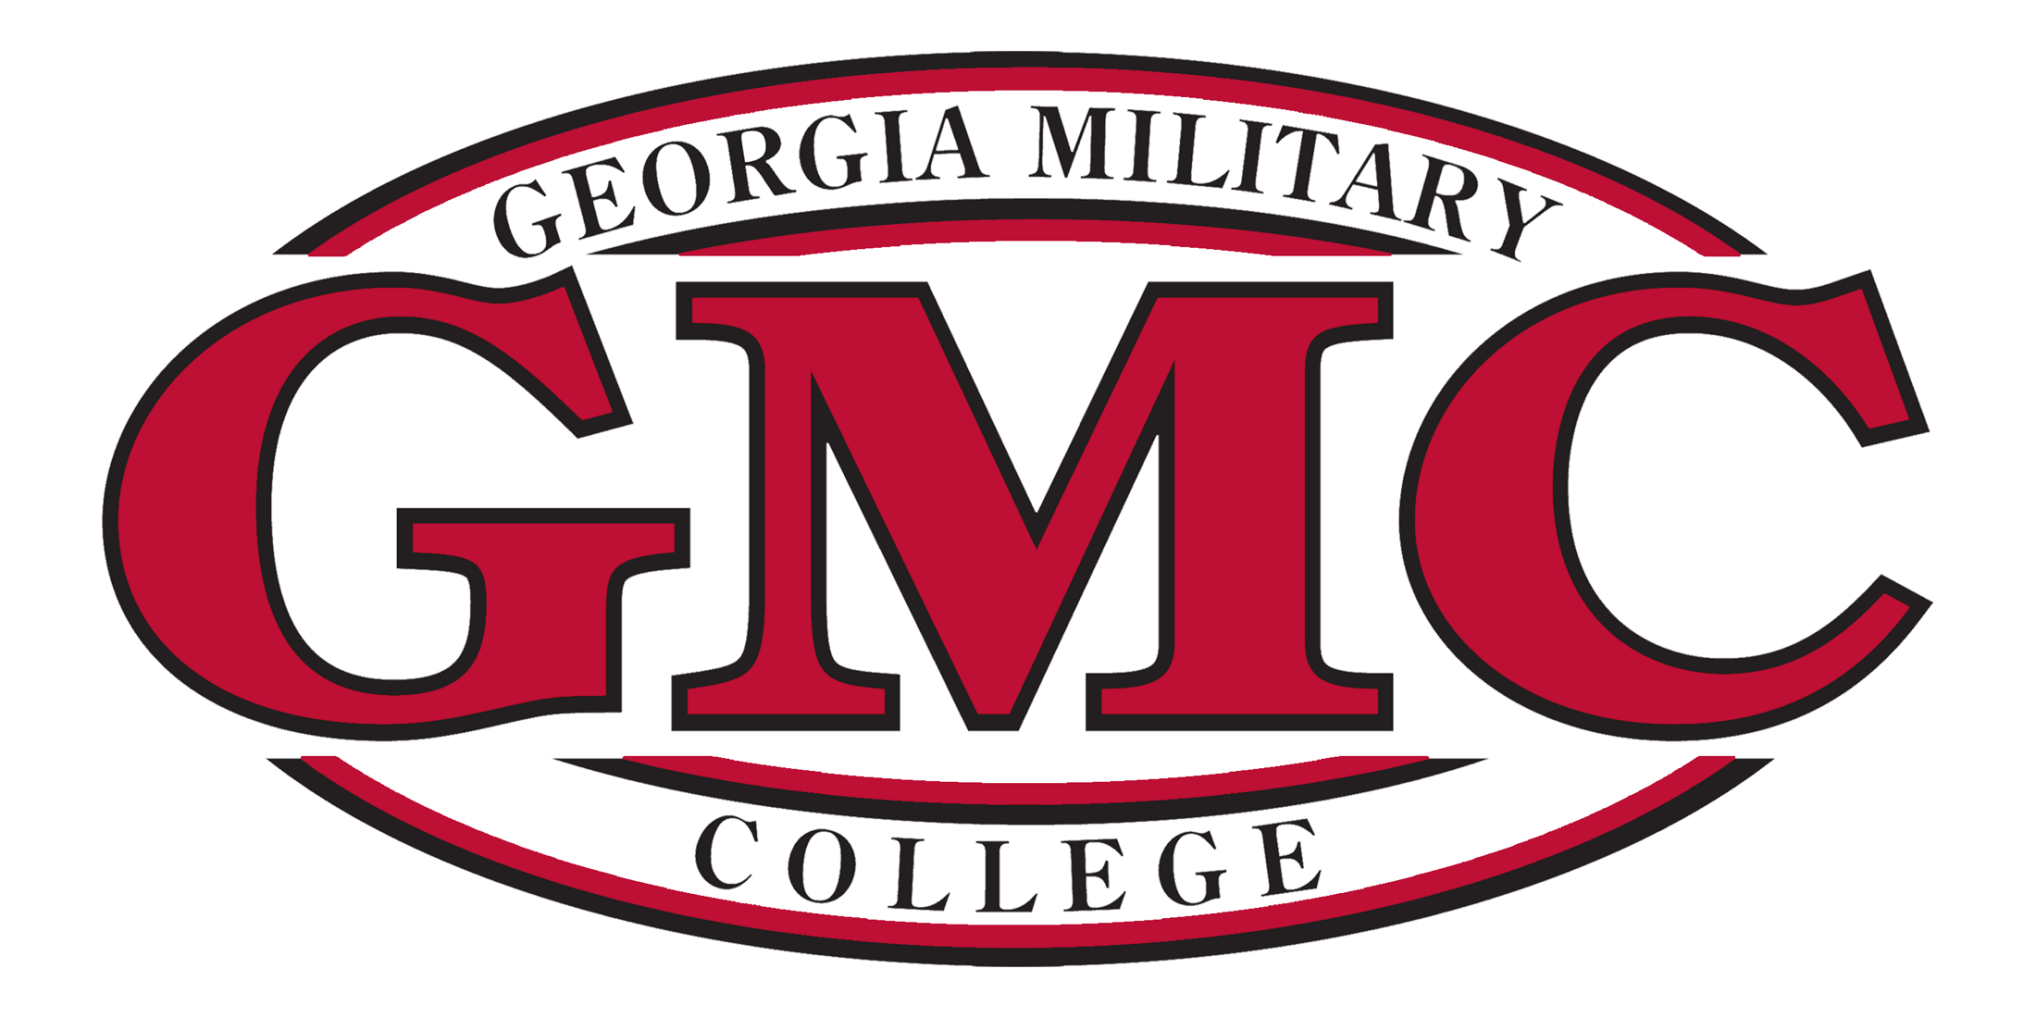 Georgia Military College Bulldogs Win 17-9 versus Lackawanna College Falcons with Blocked Kicks and Strong Performance from Jamarion Walker